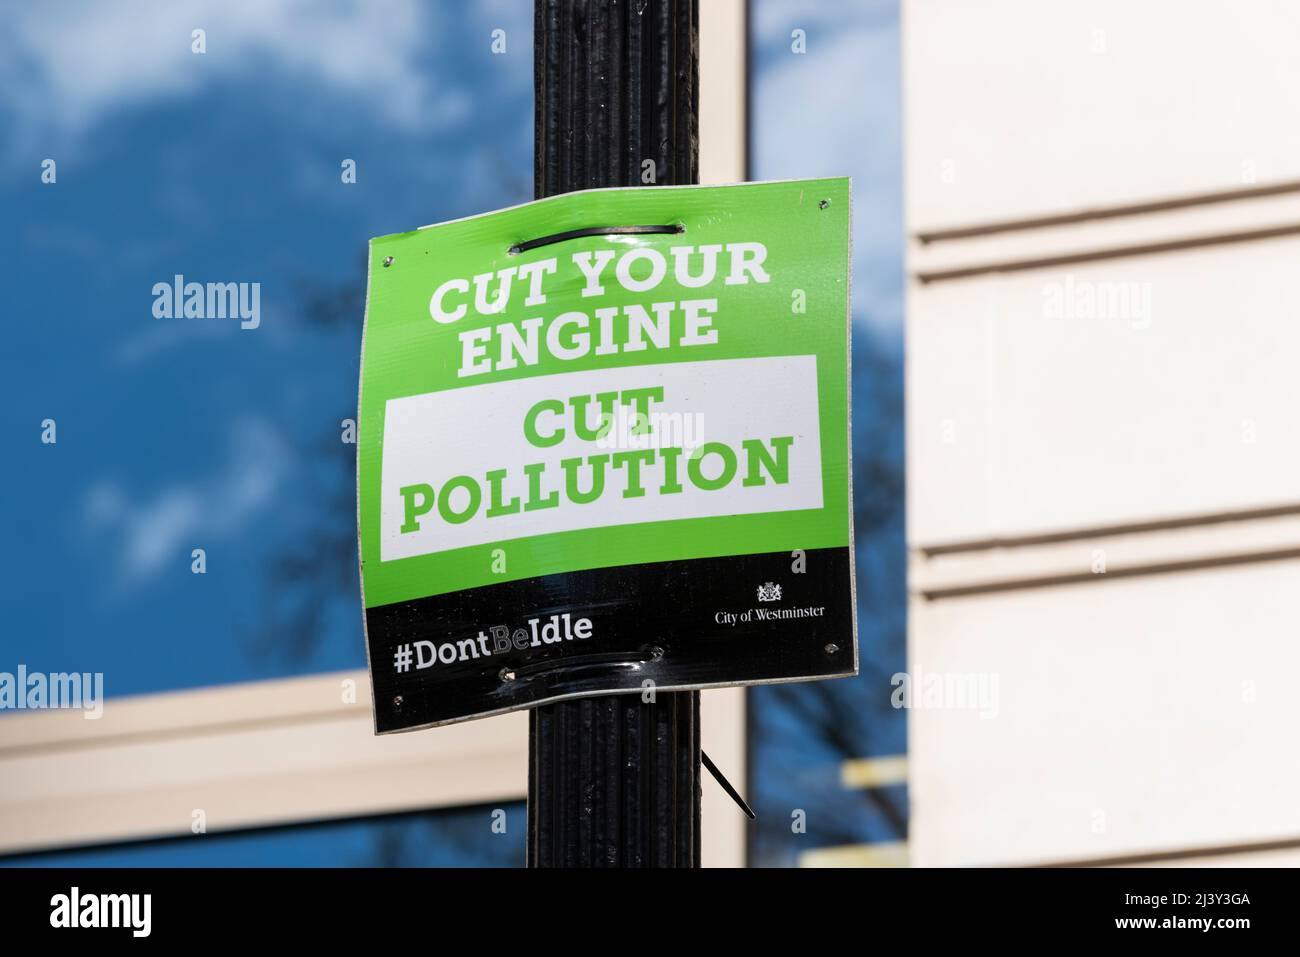 Cut pollution, cut your engine, sign. City of Westminster environmental campaign. Hashtag don't be idle Stock Photo